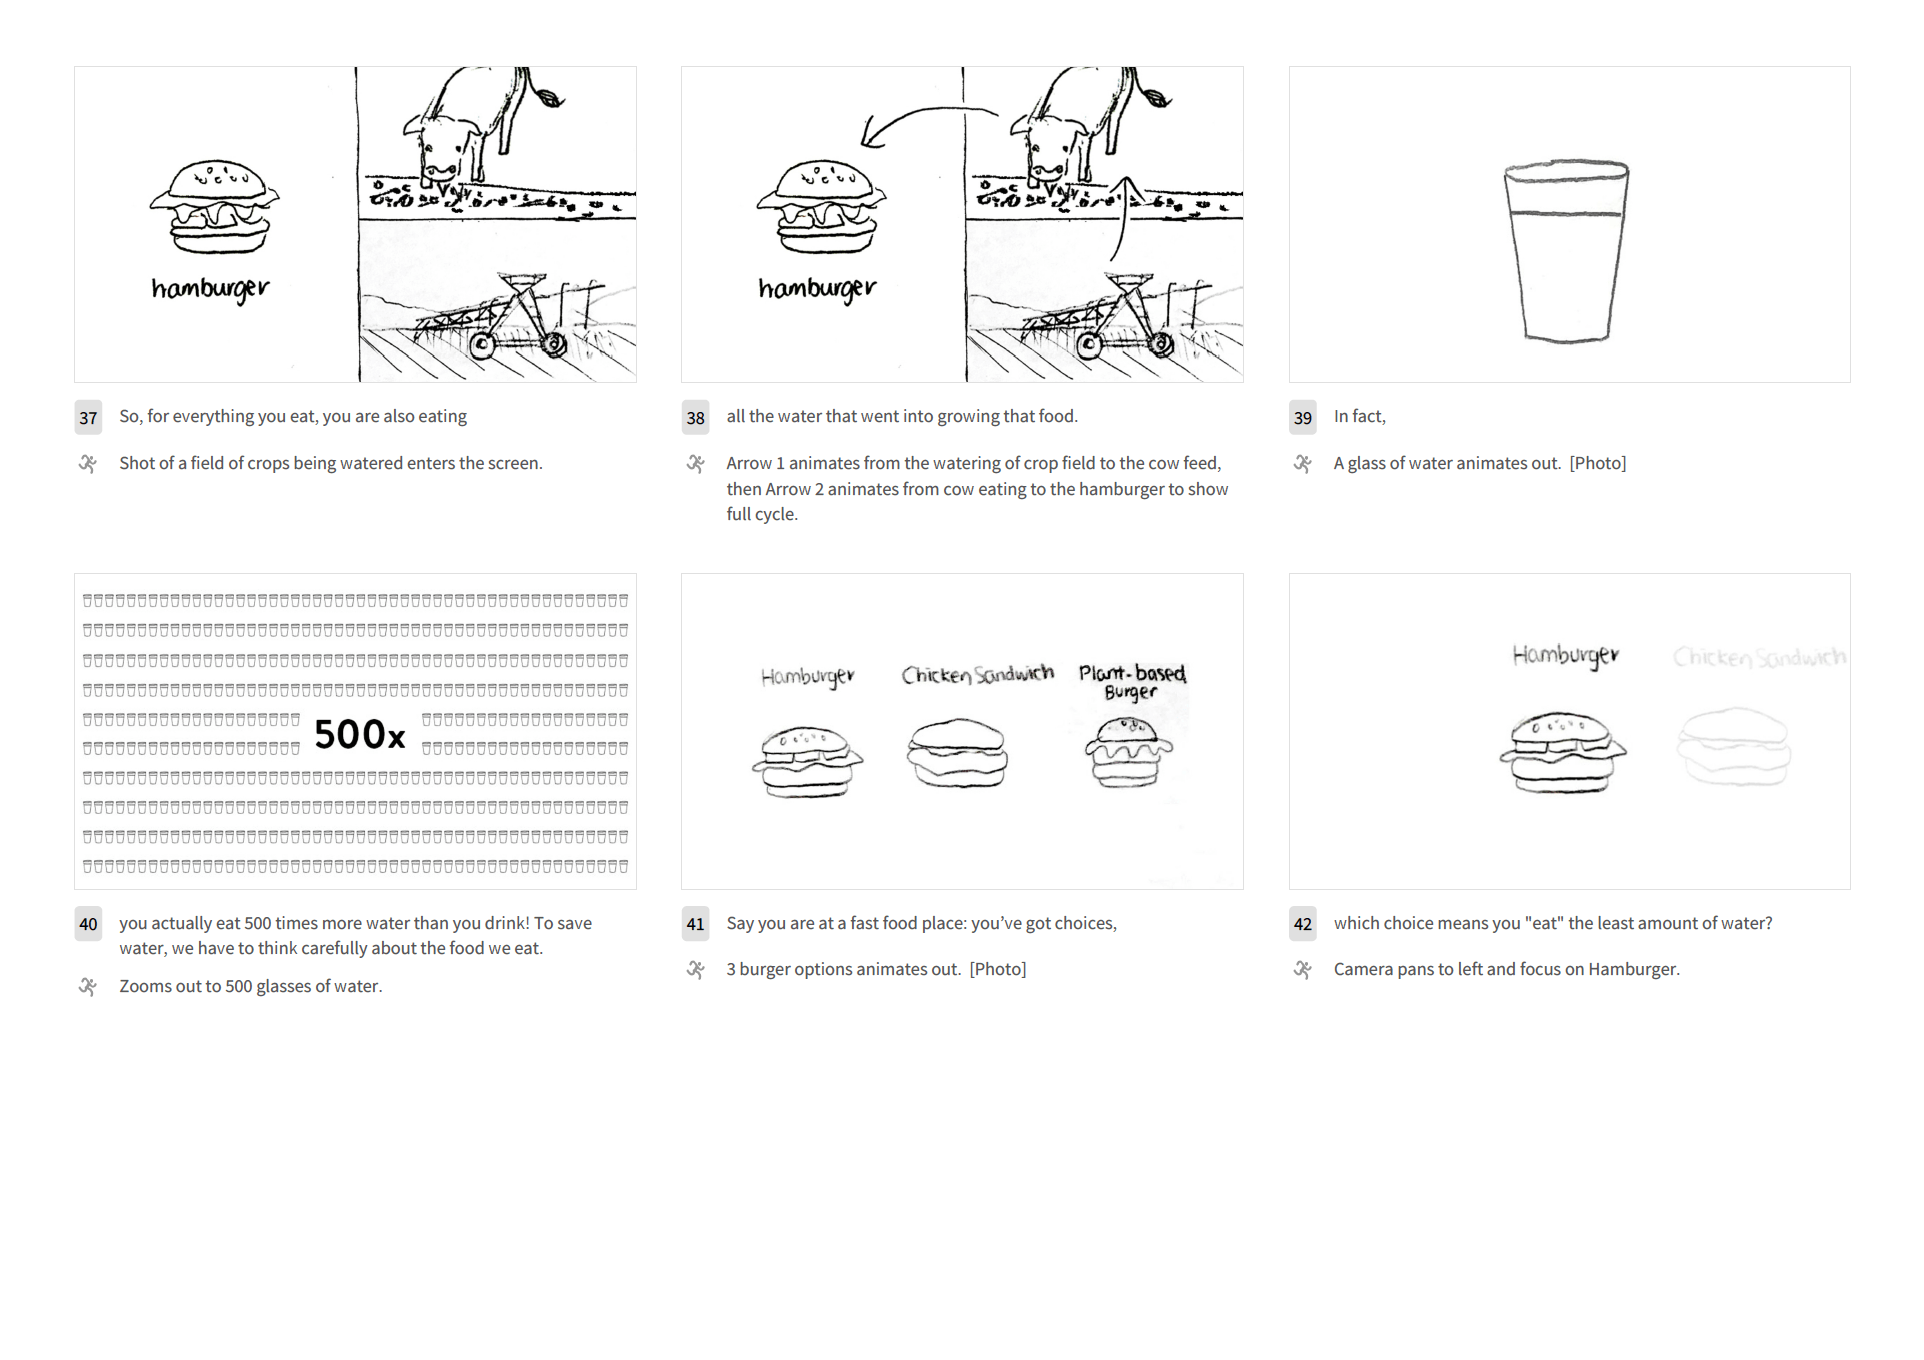 ucla-ioes-storyboard4.png